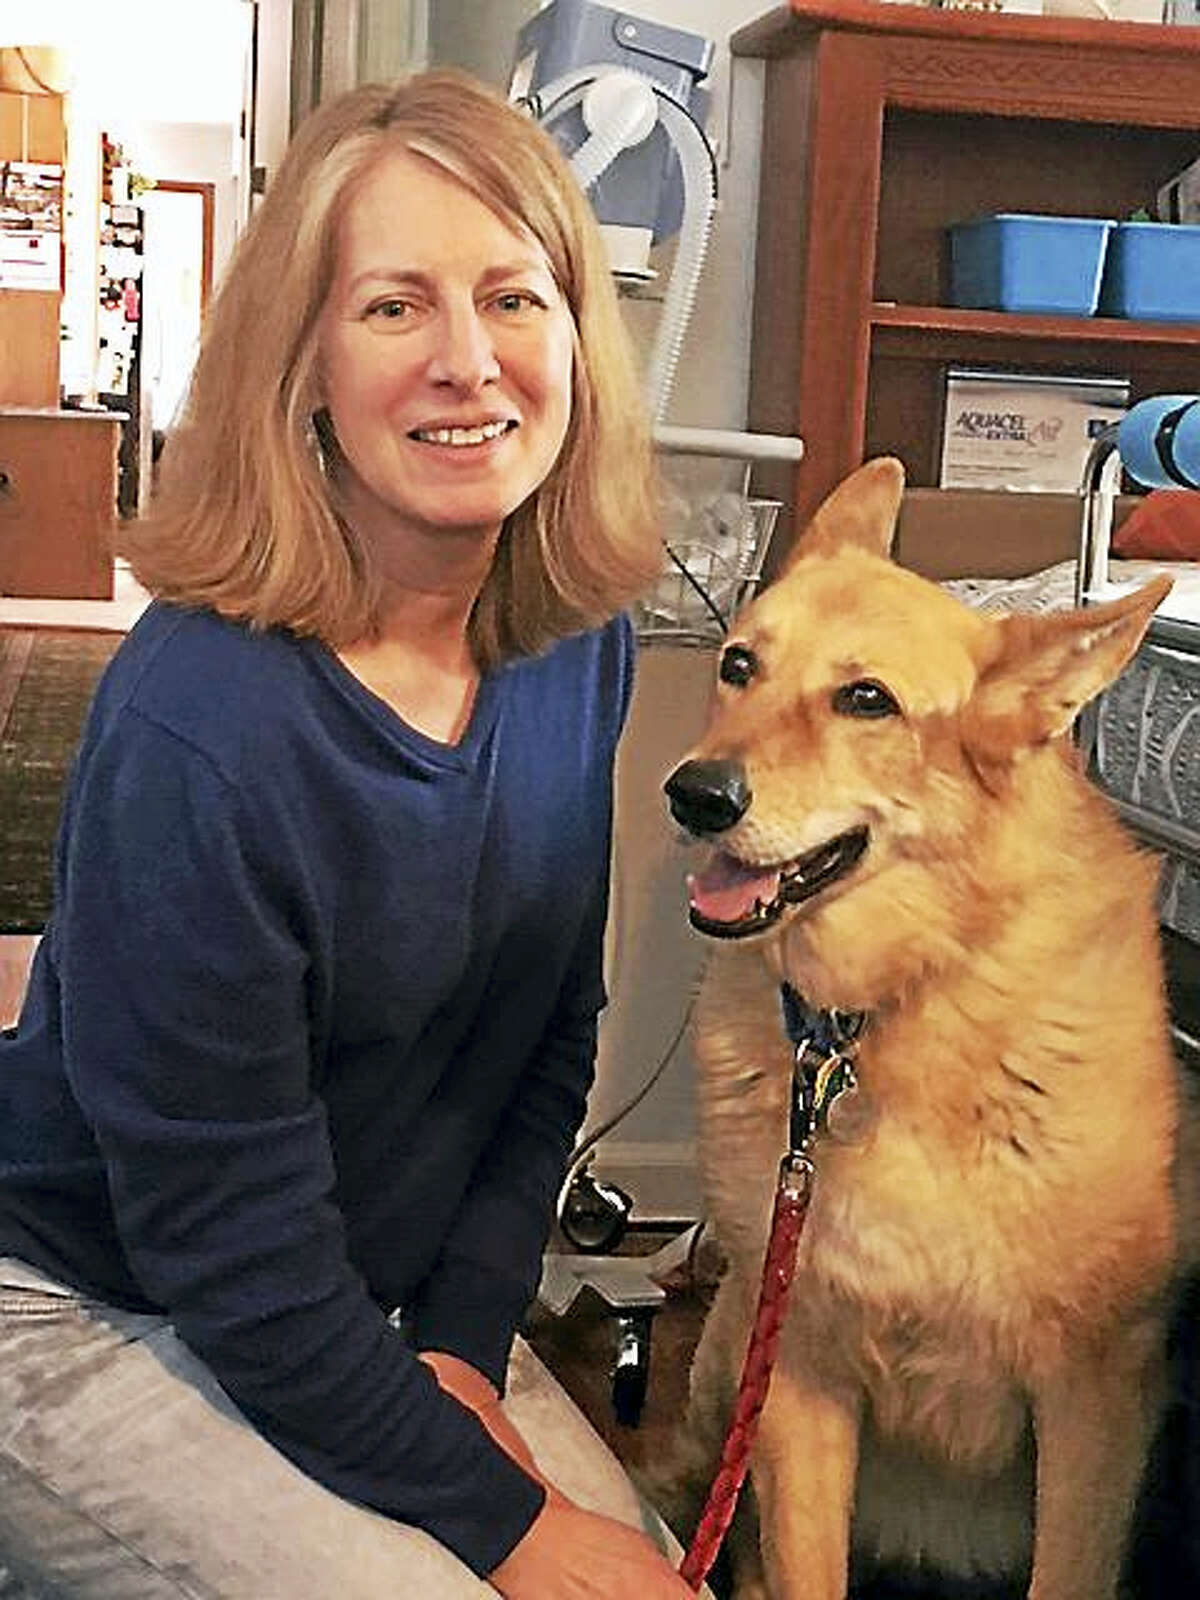 Middlefield resident Annette Olma and her 10-year-old German Shepherd mix Cola are a hospice pet therapy team that have been bringing joy to patients for over six years.